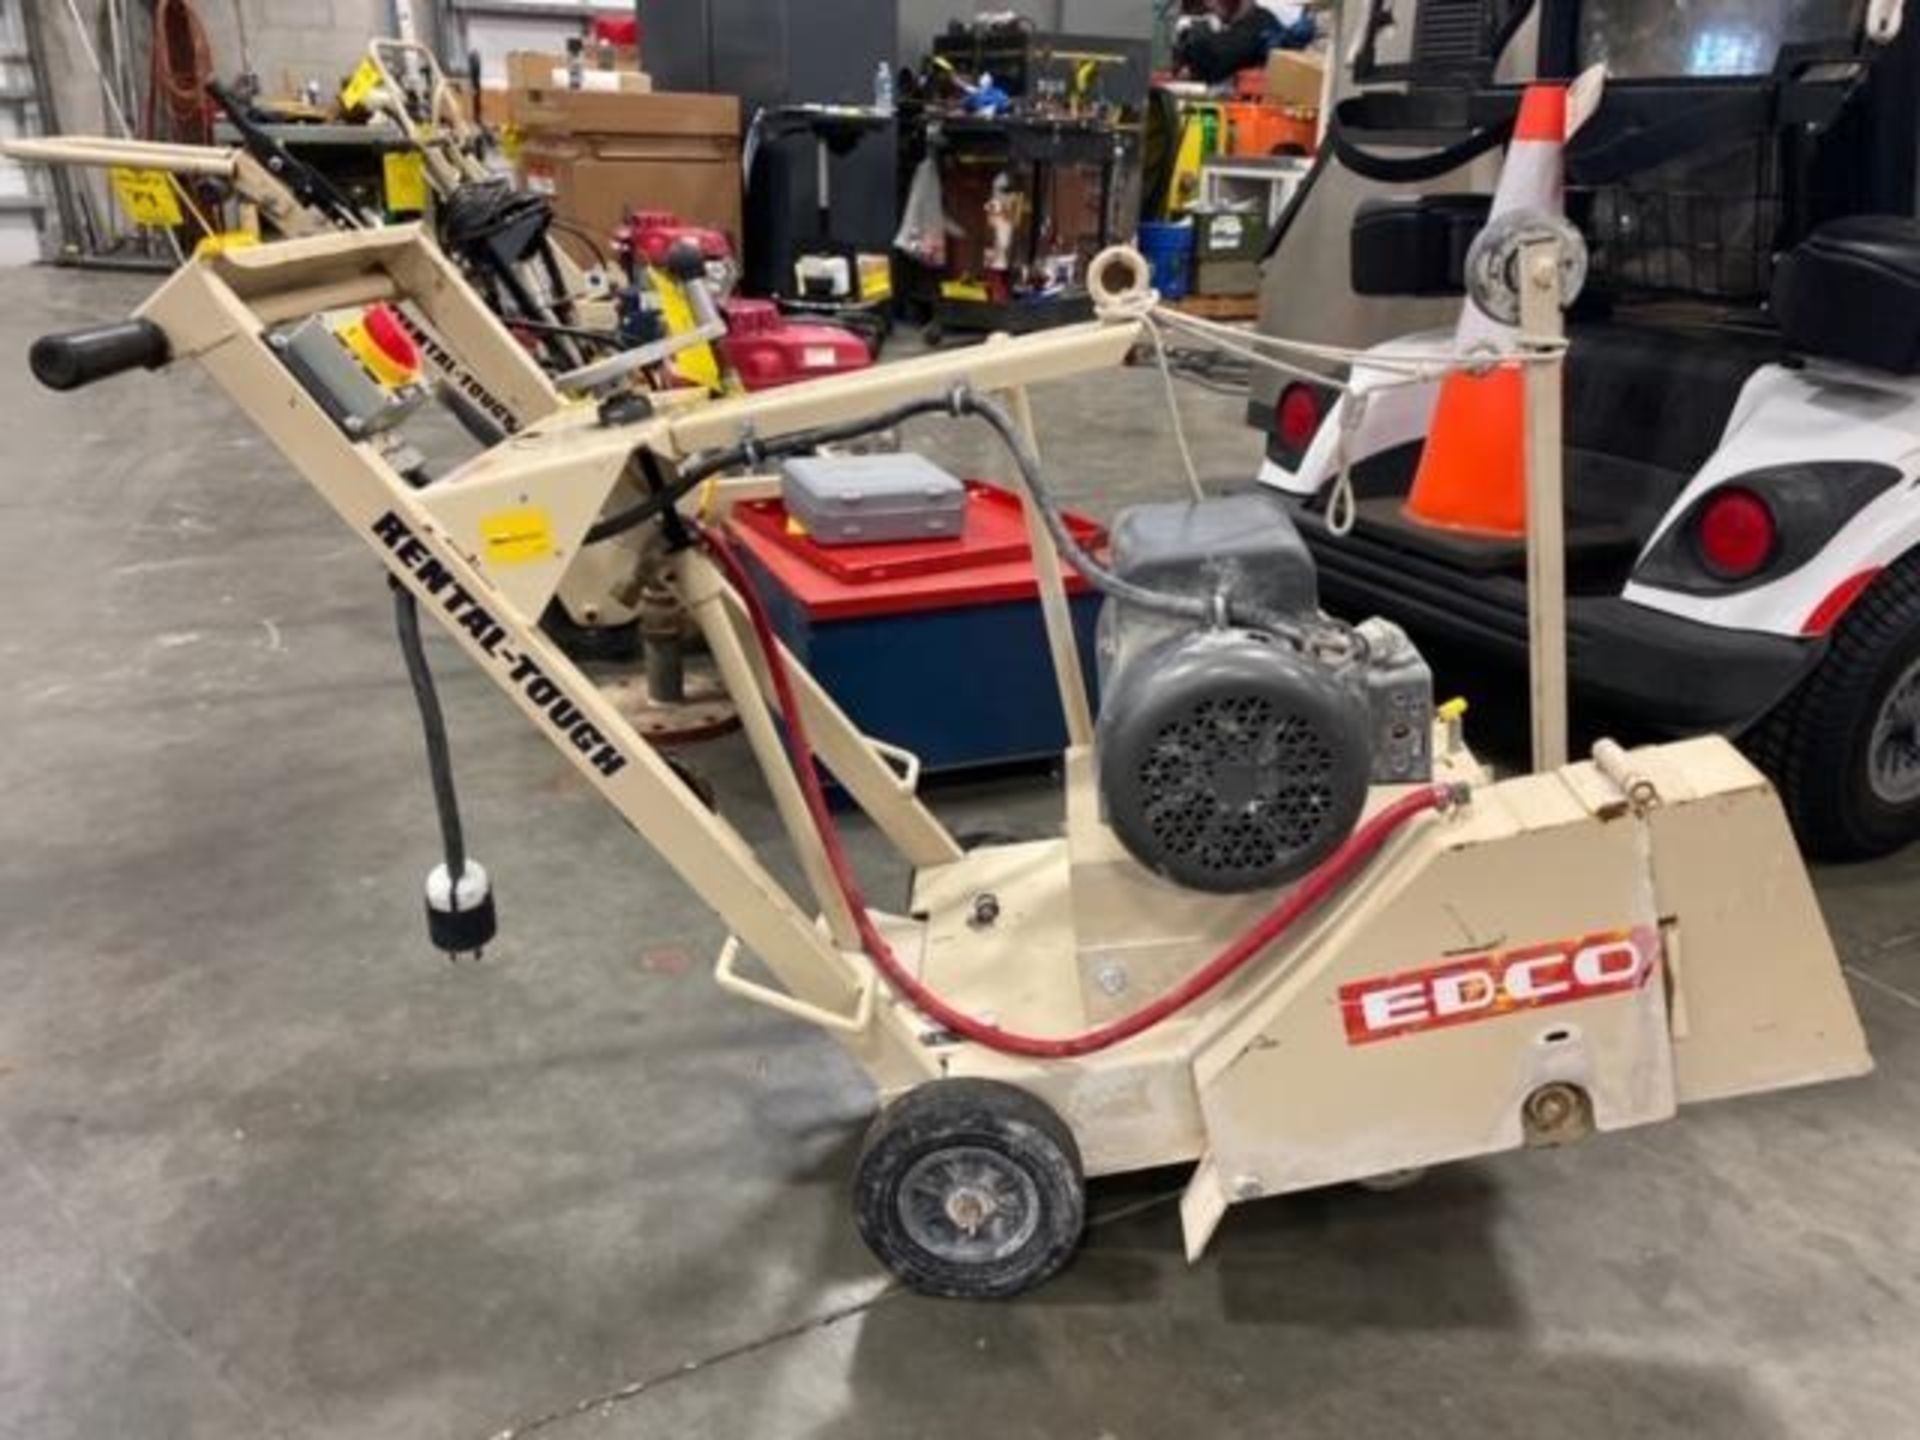 2017 EDCO DS-18-5 WALKBEHIND SAW SUPPORT EQUIPMENT